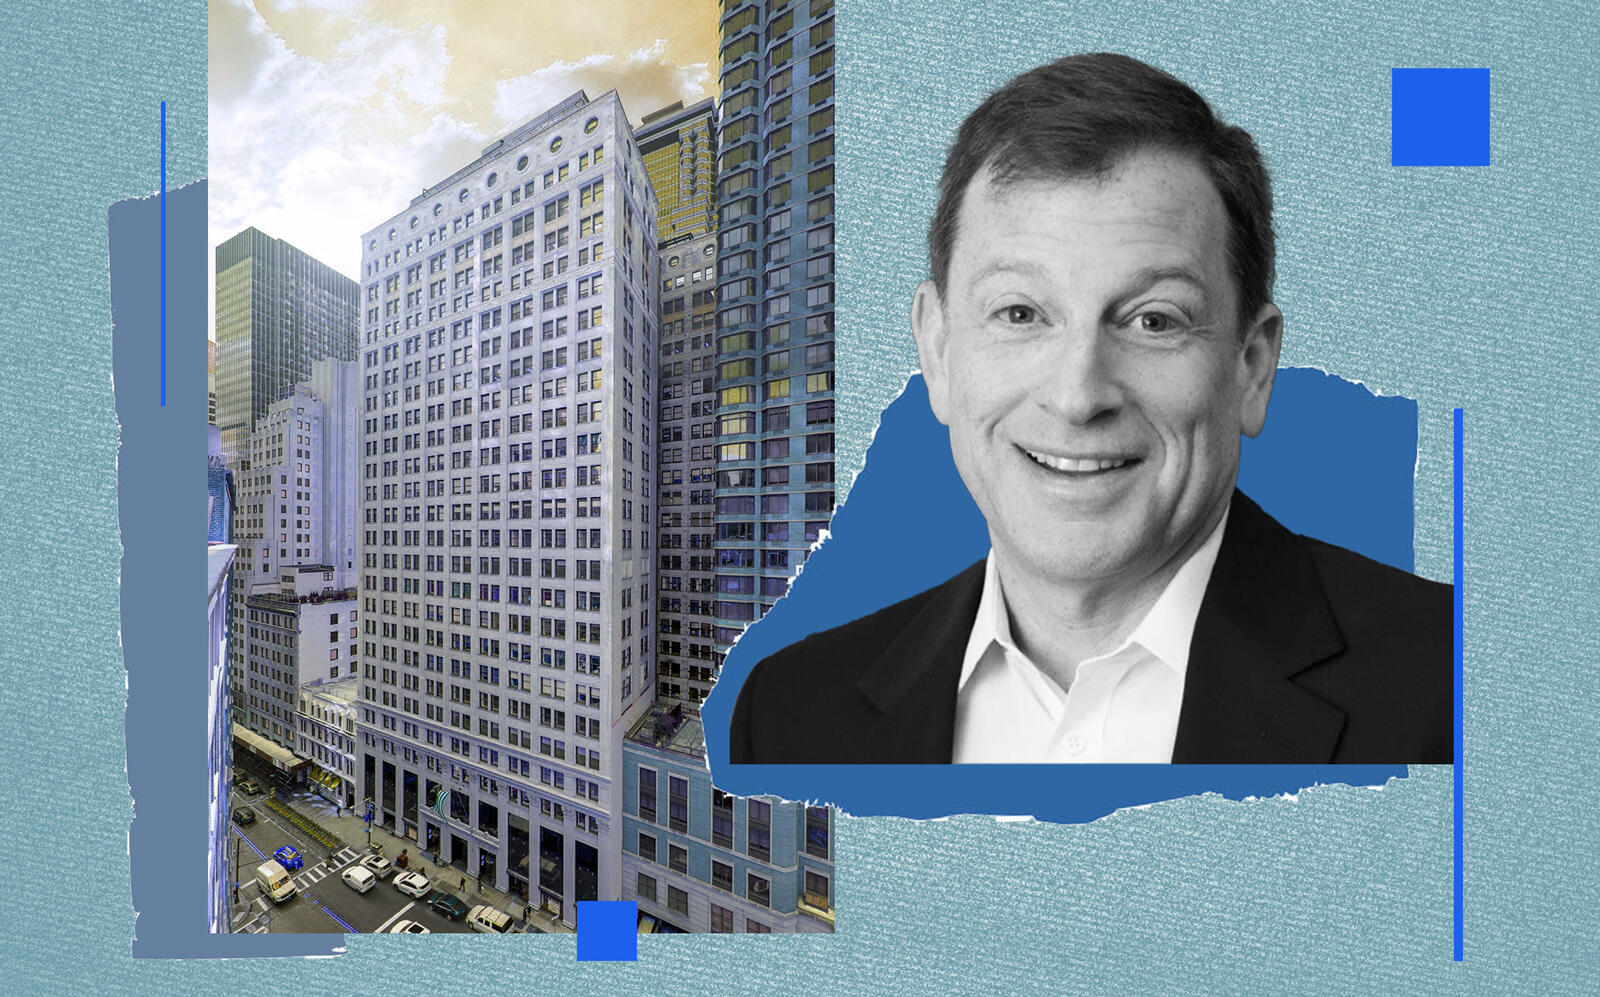 80-90 Maiden Lane and Meadow Partners managing partner Jeffrey Kaplan (80 Maiden Lane, Meadow Partners)